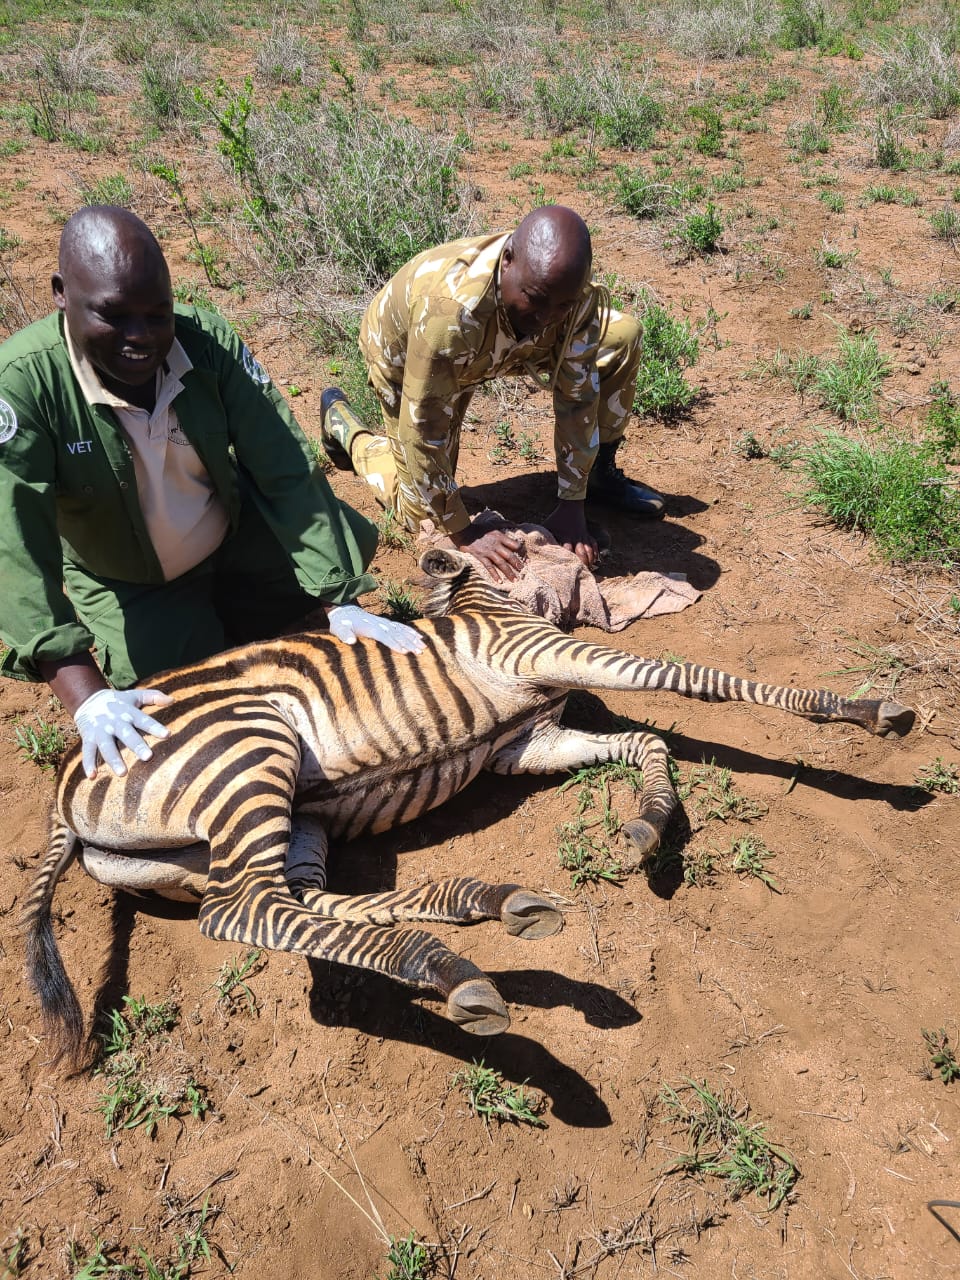 KWS rangers with other stakeholders removing a snare from a zebra during patrol.